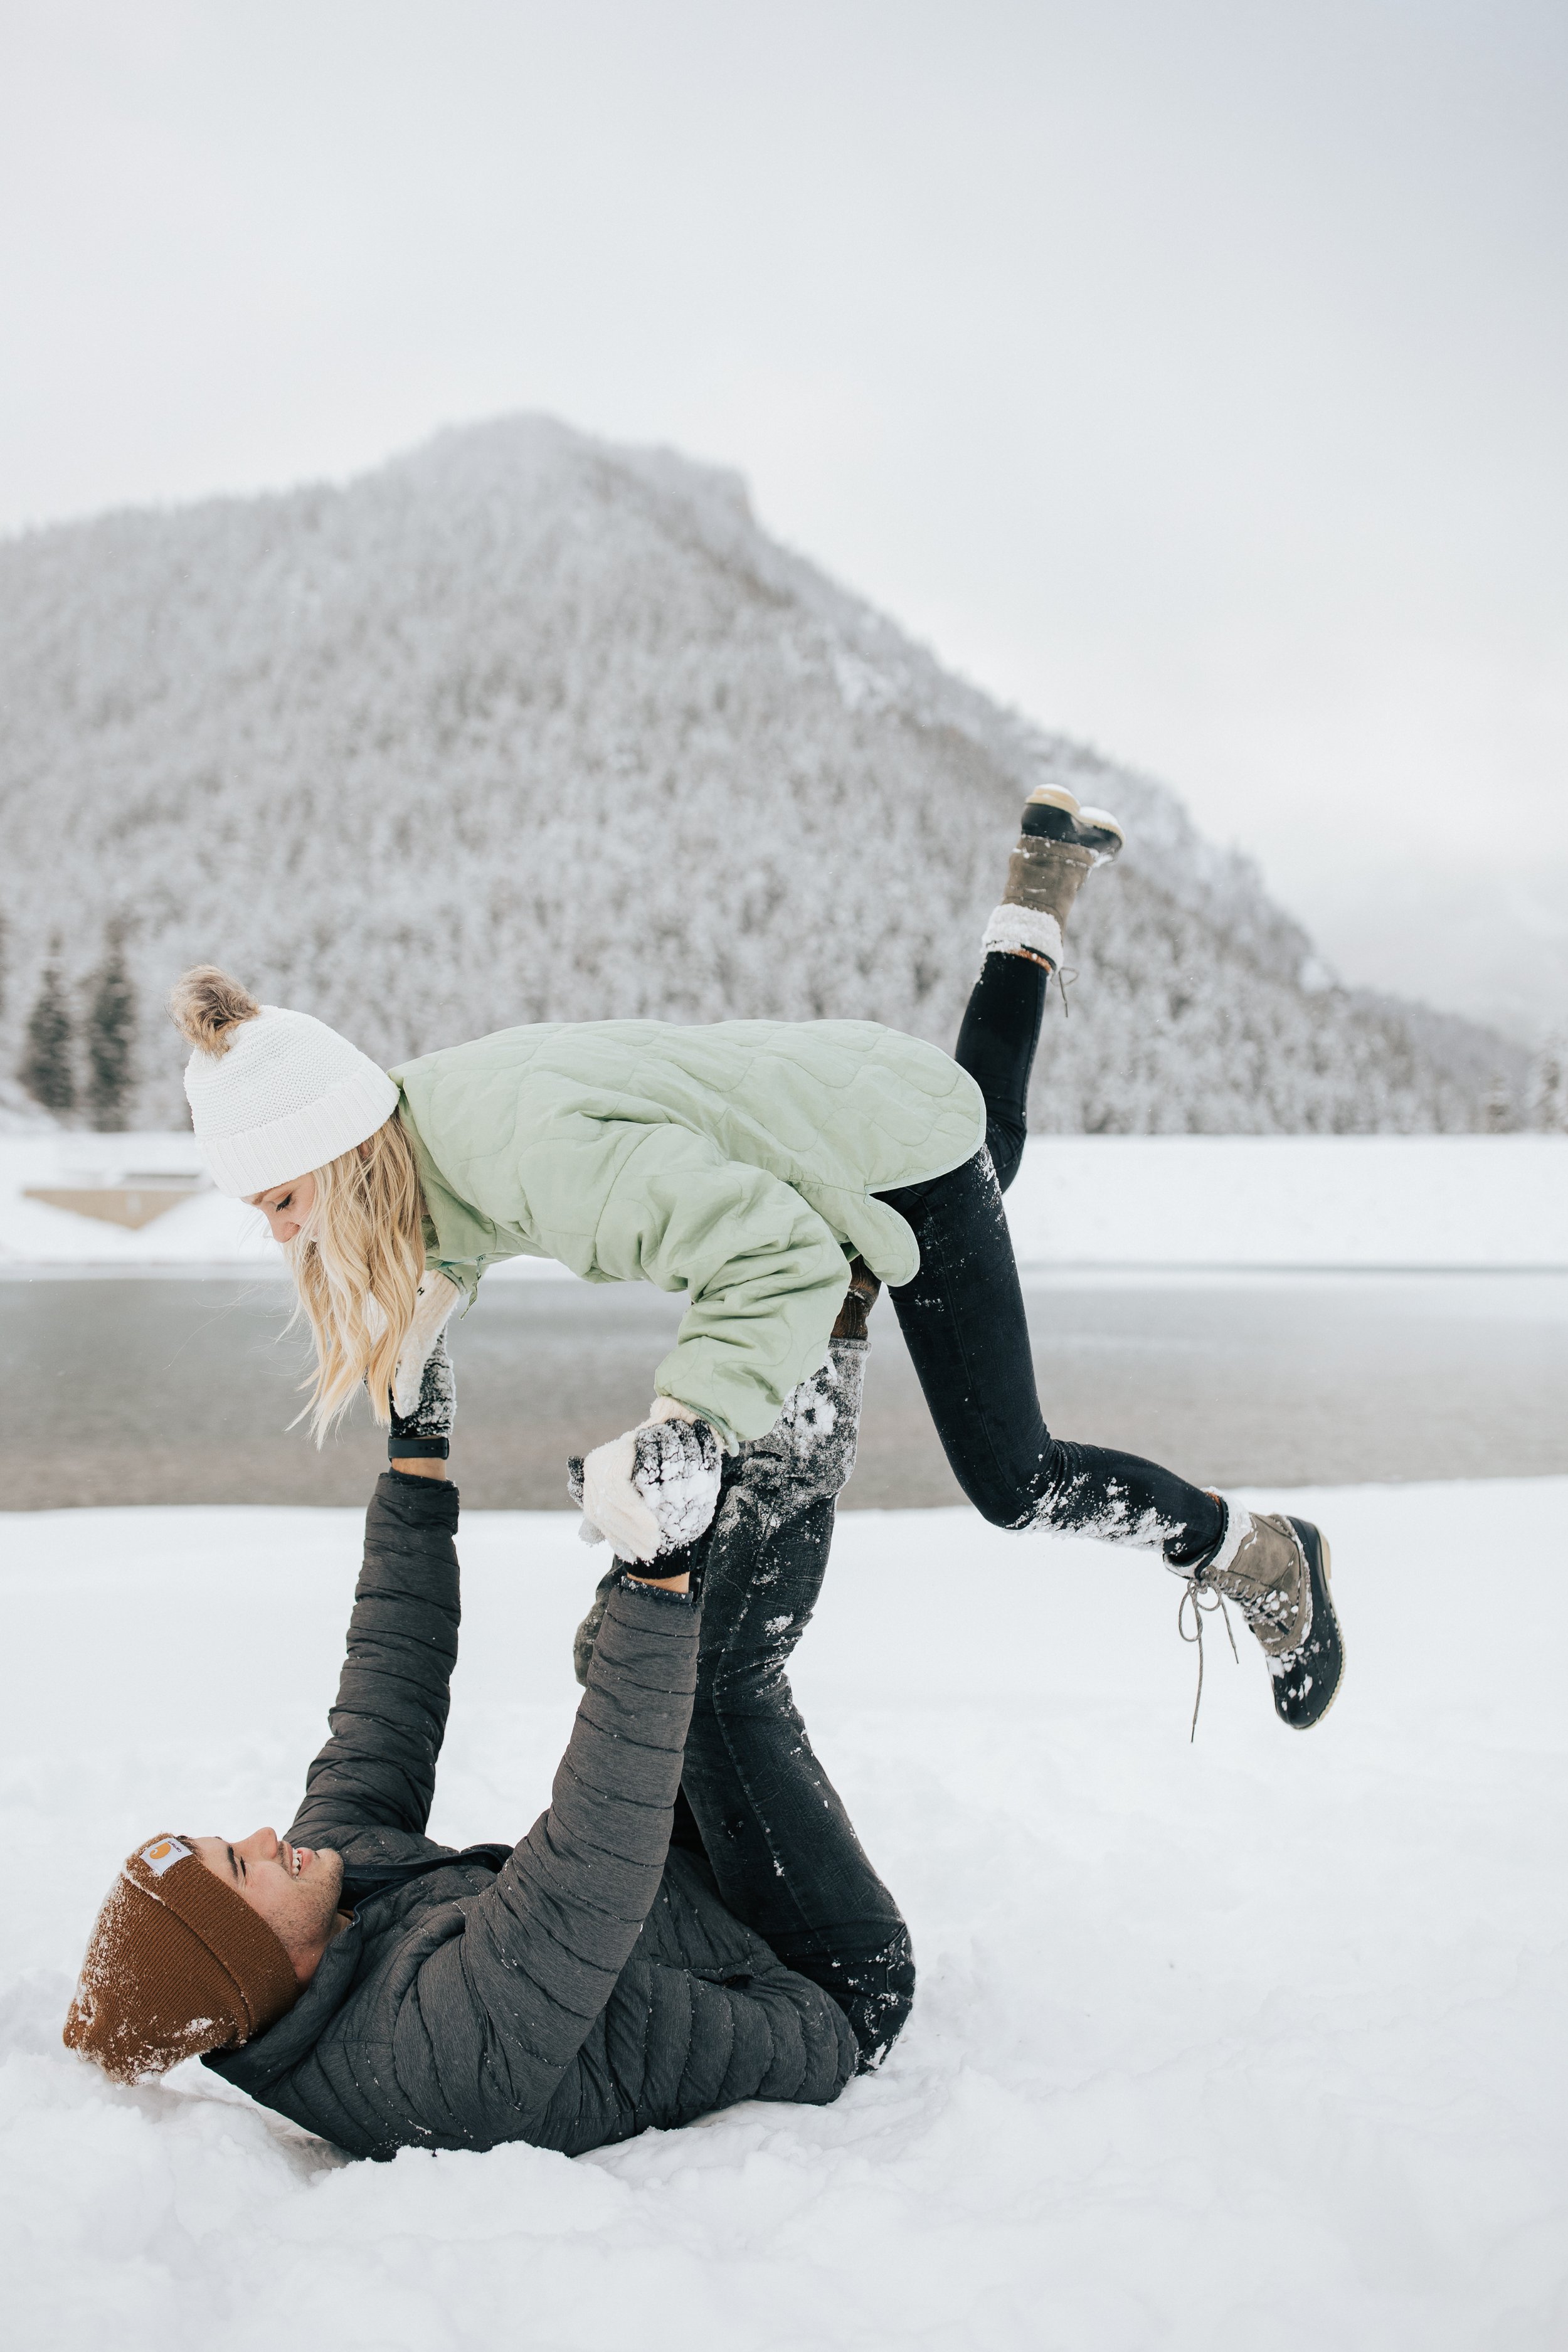  Winter photoshoot outfit inspo. Man and woman play in the snow in the mountains wearing coats and beanies. Utah mountain engagement shoot in the winter. Park City, Utah photographer. #winter #engagements #engagementsession #utahphotoshoot #utahengag